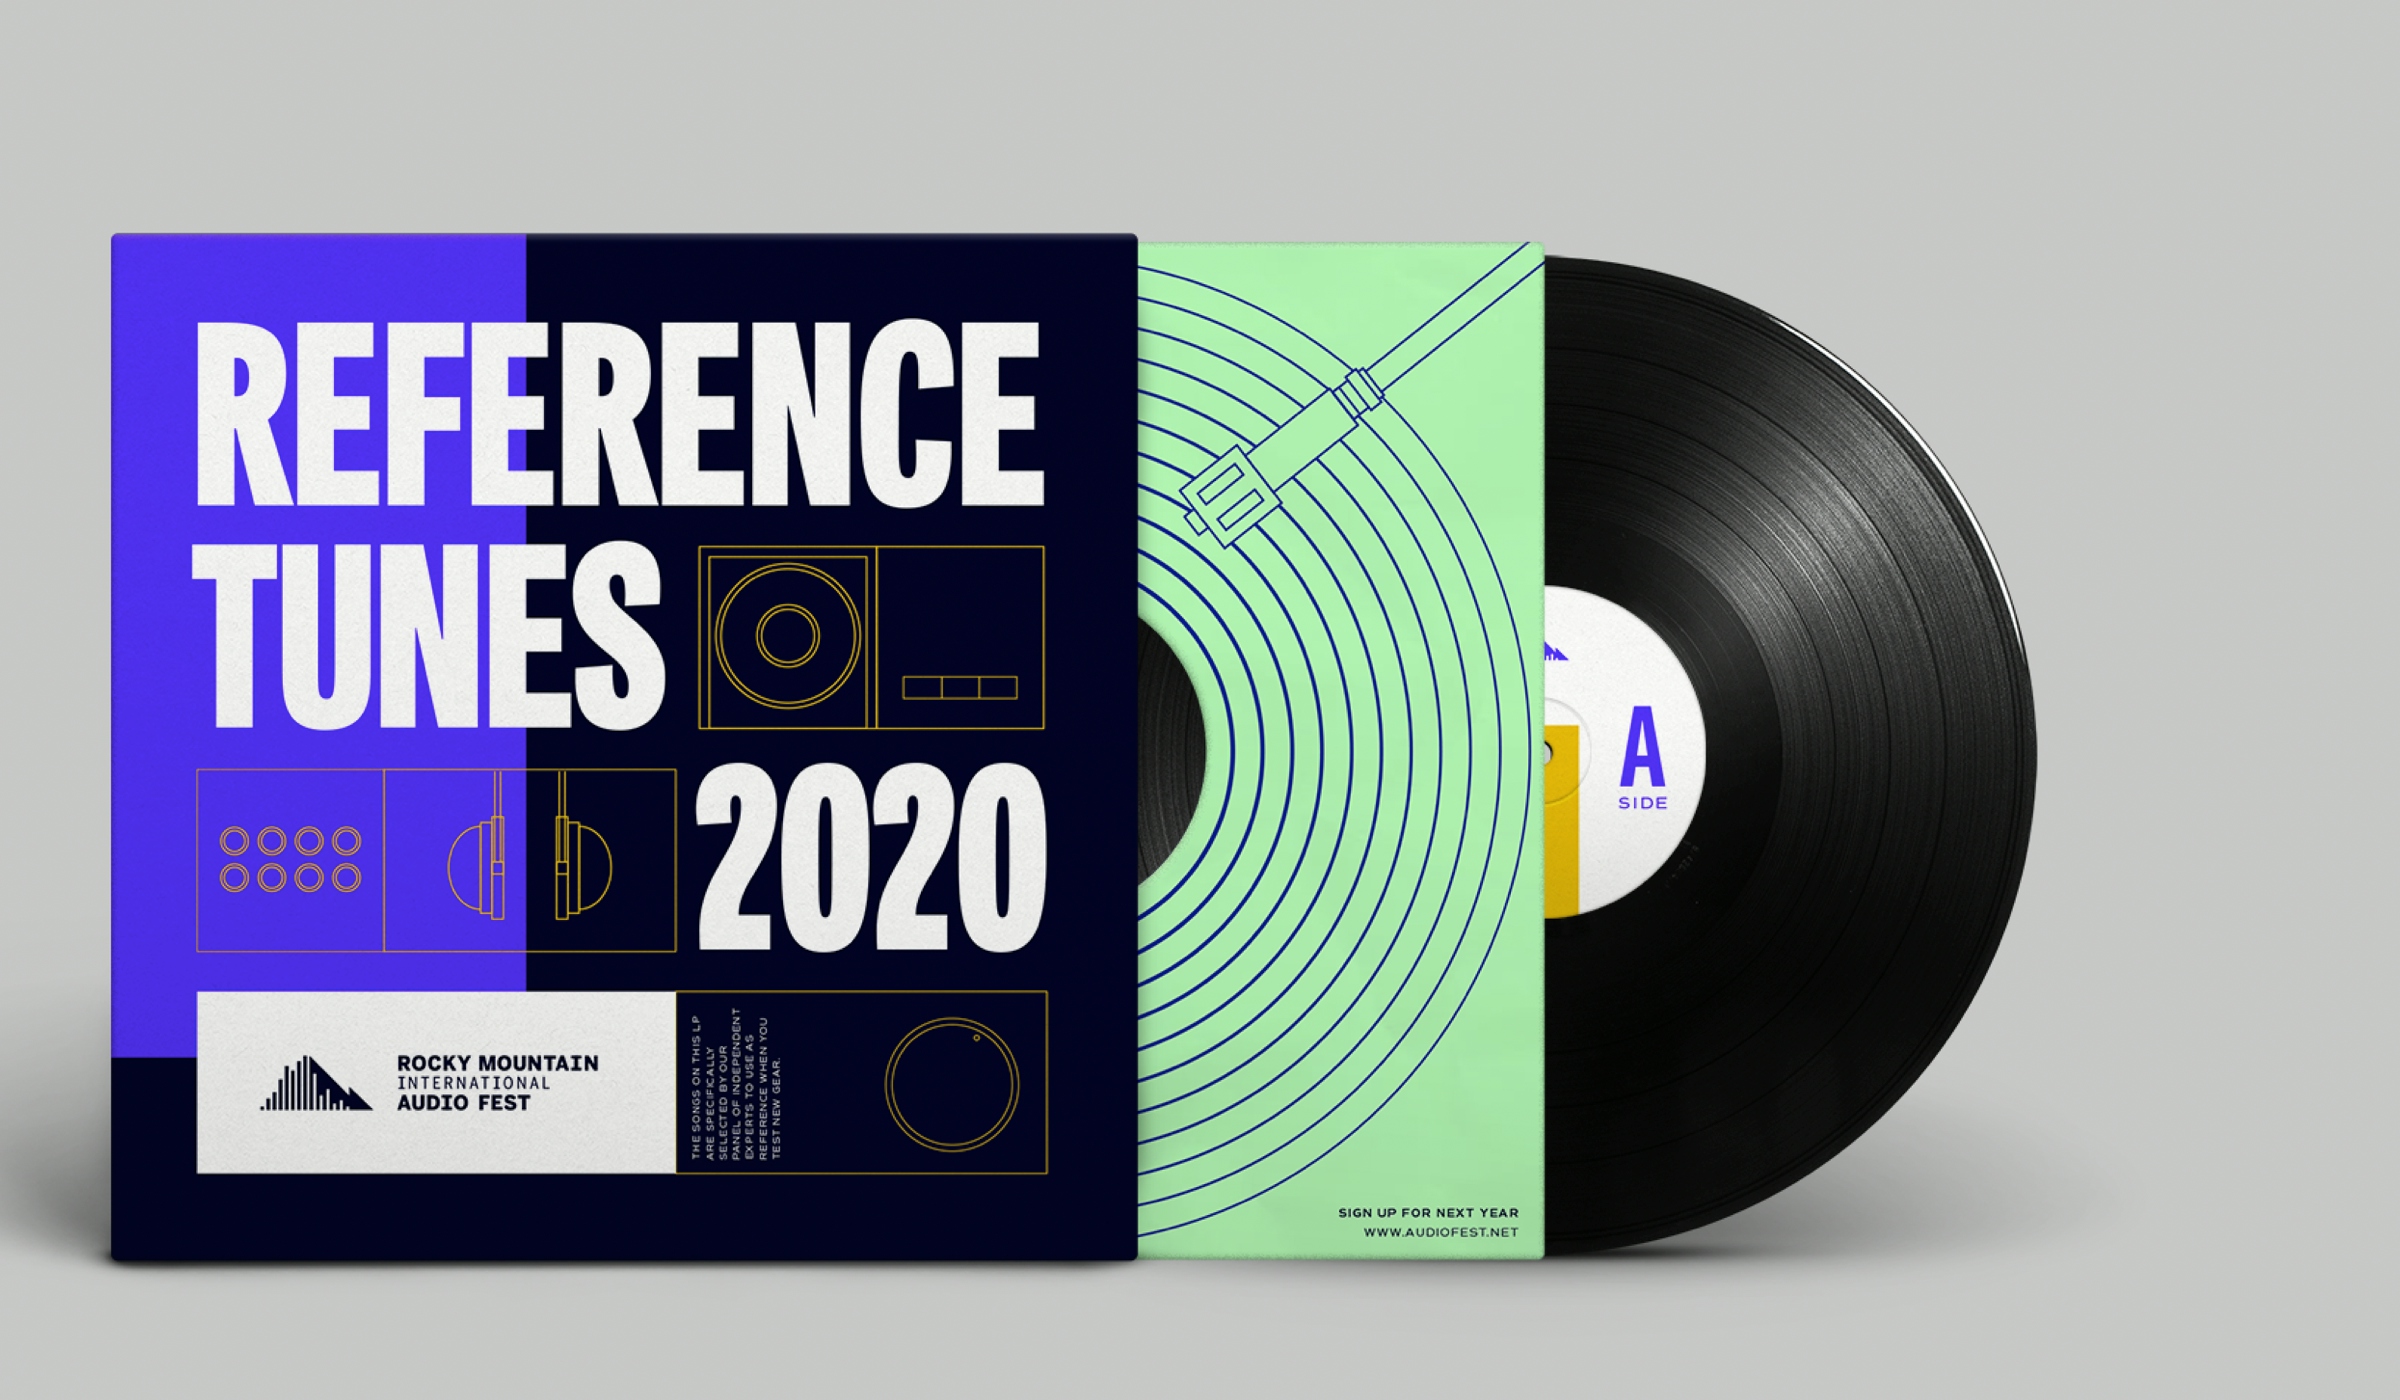 "Reference tunes for 2020"